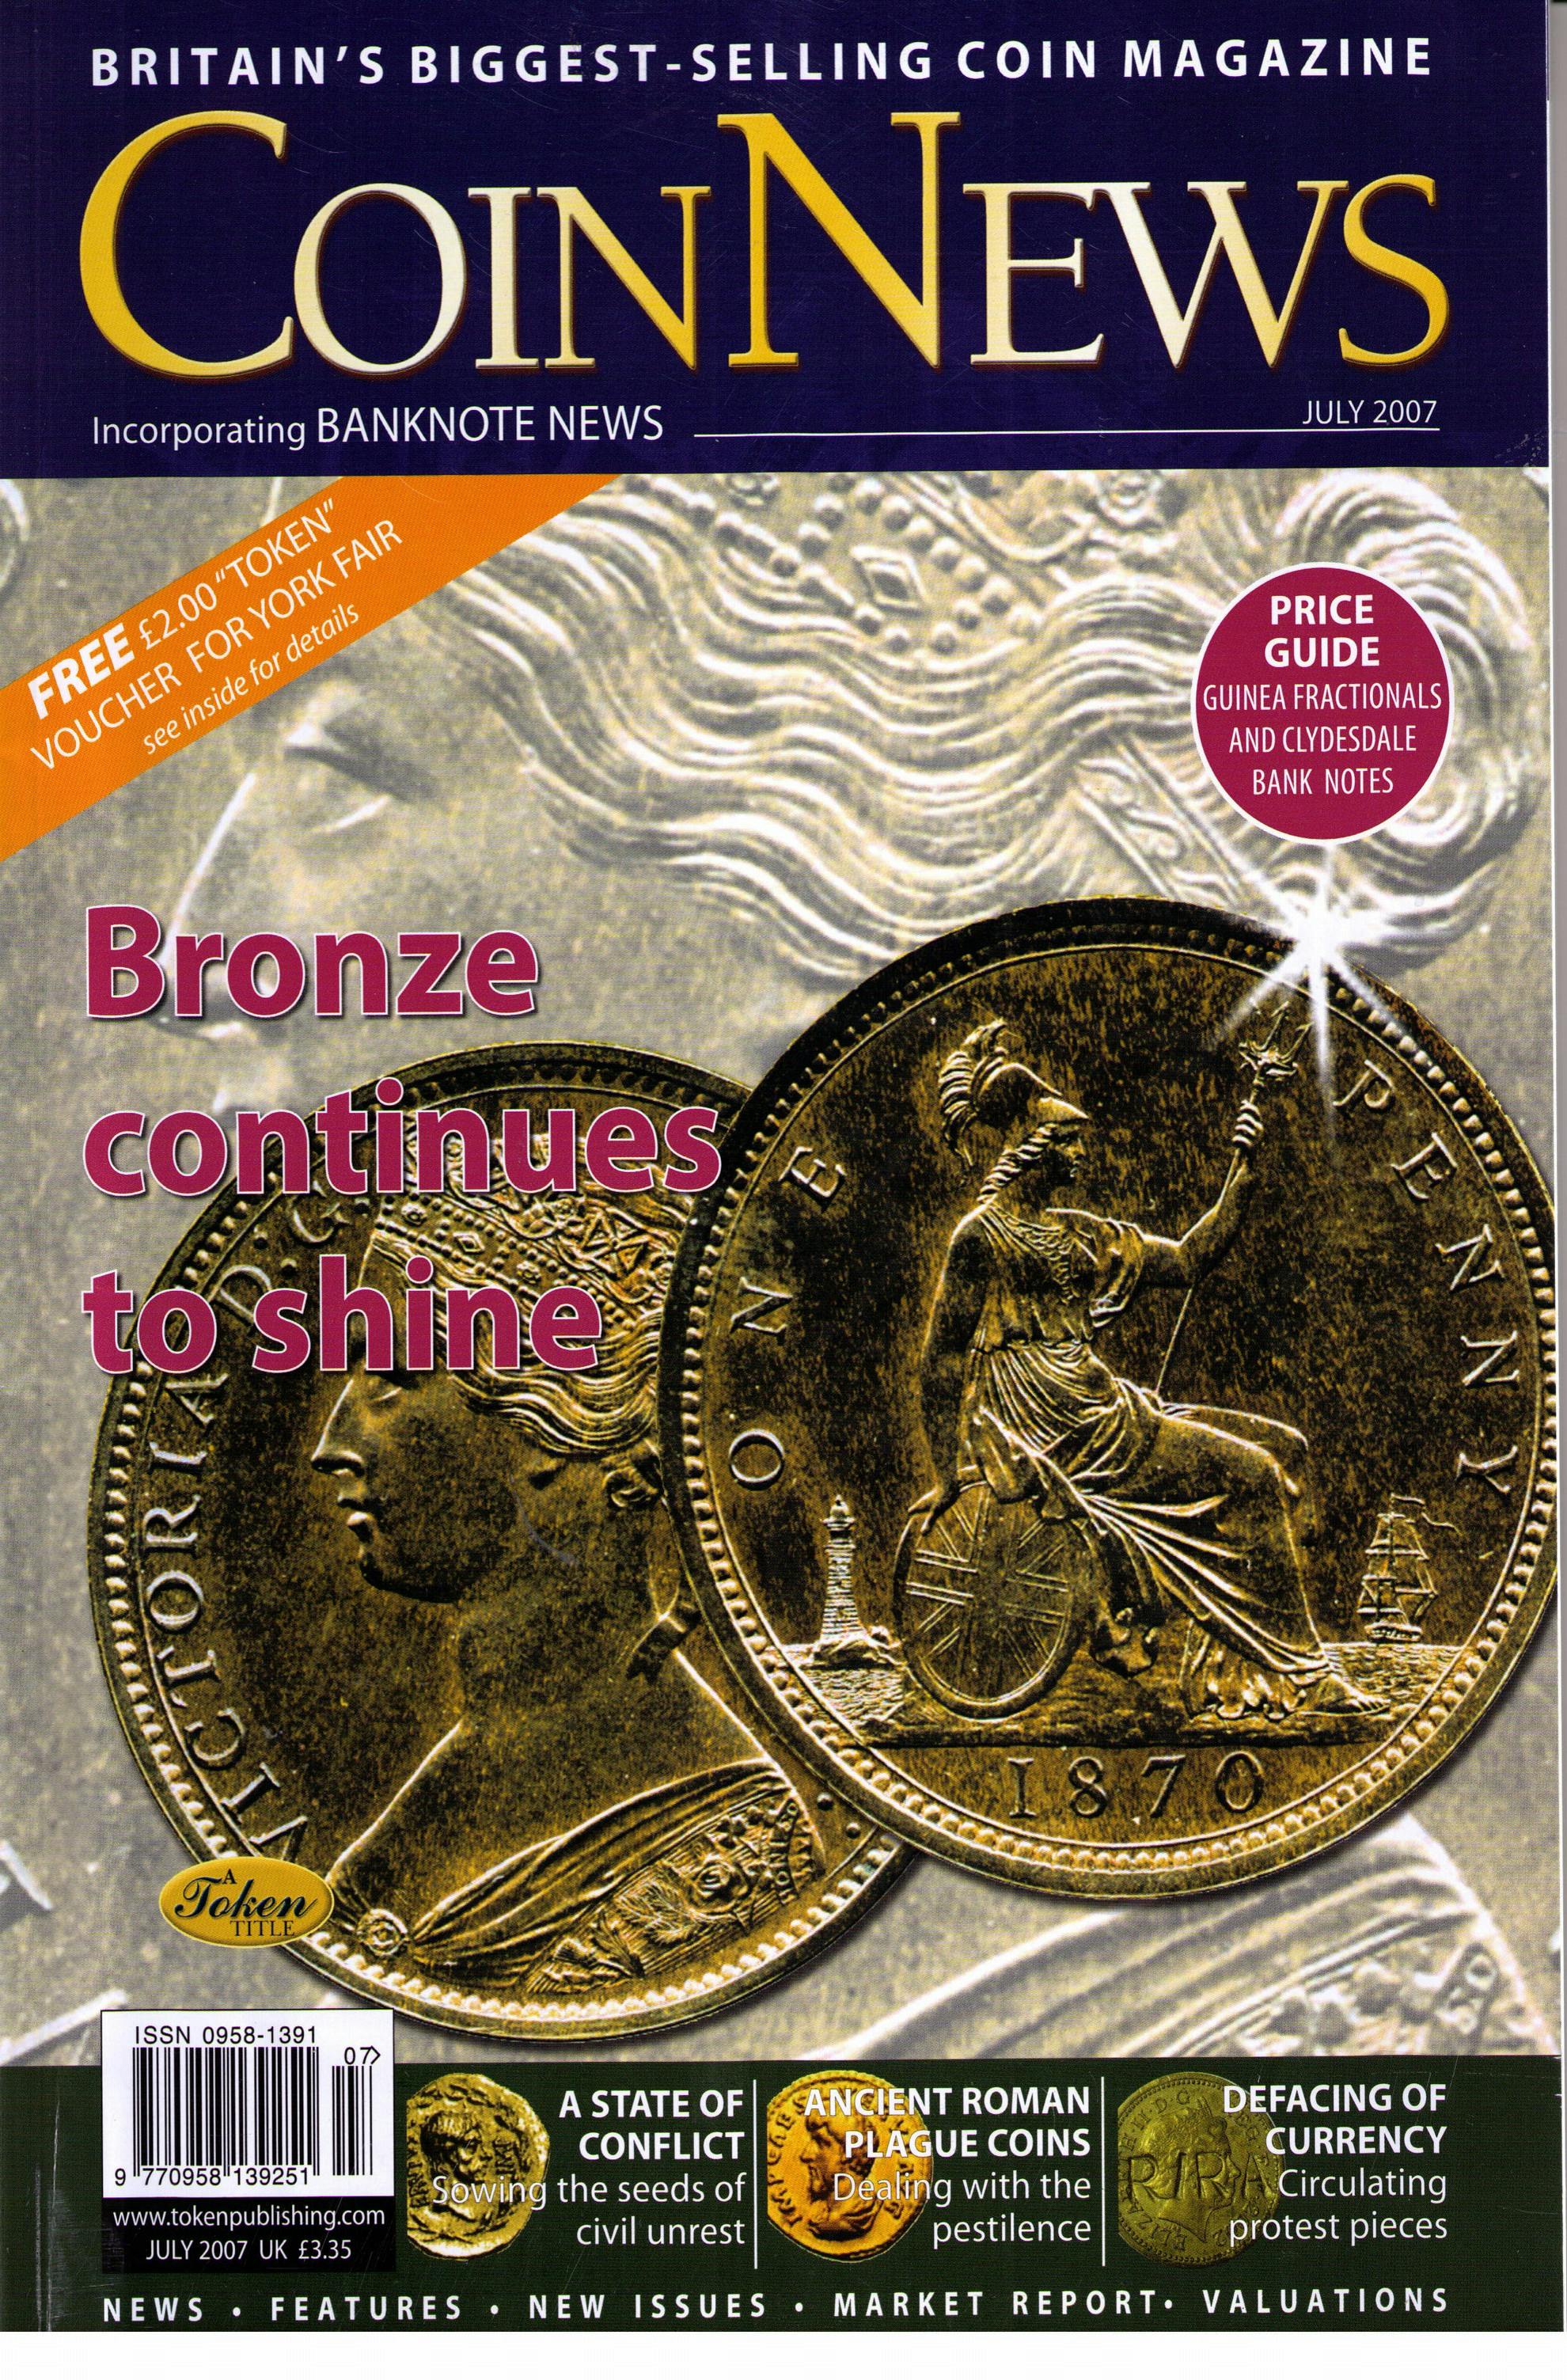 Front cover of 'Nothing new under the sun', Coin News July 2007, Volume 44, Number 7 by Token Publishing